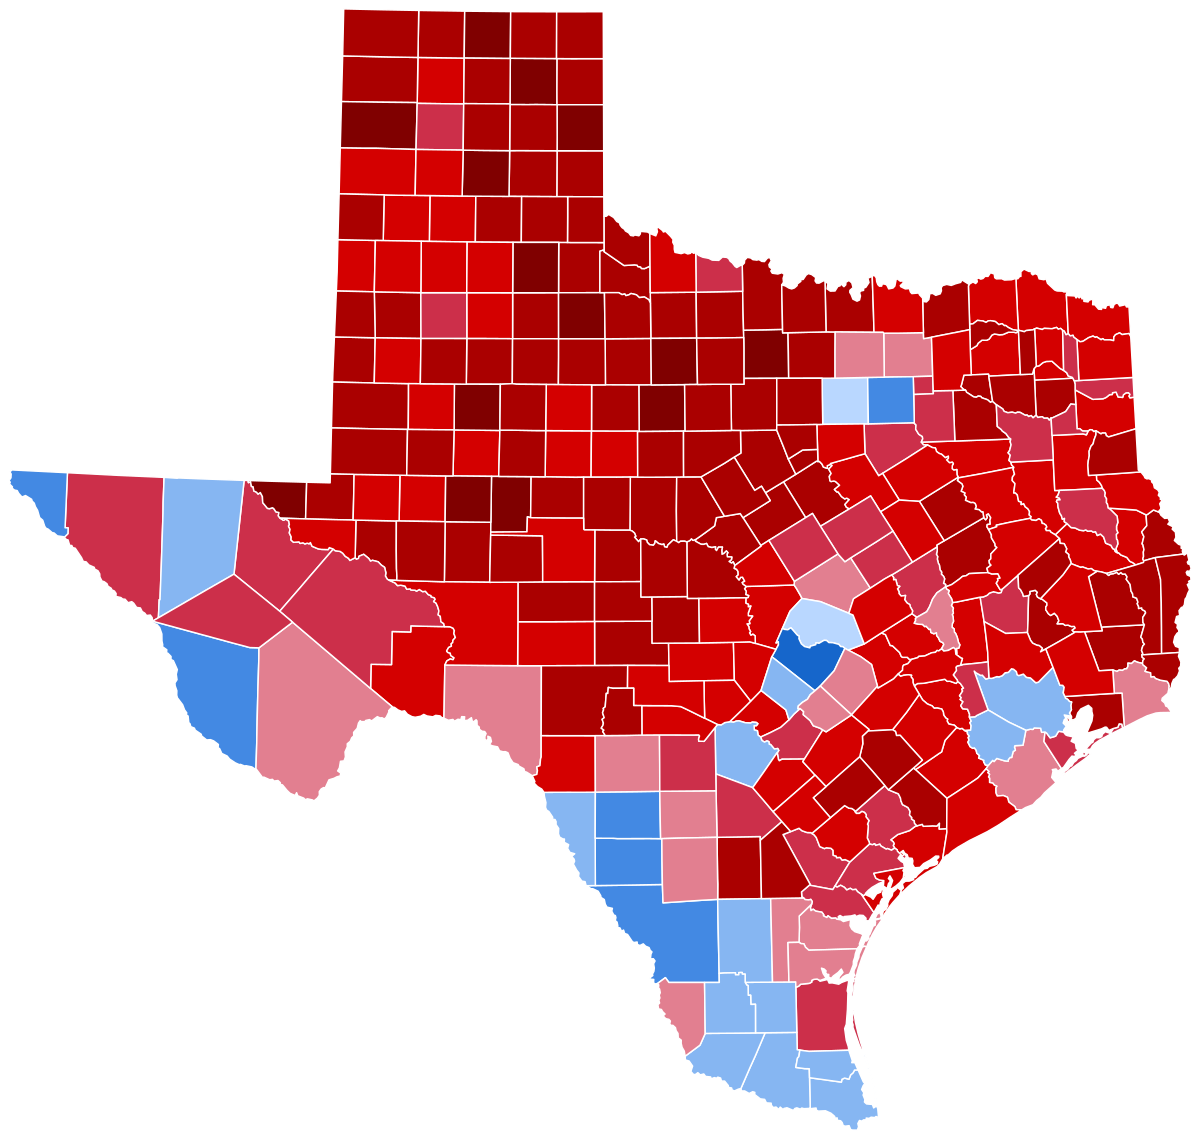 2020 united states presidential election in texas